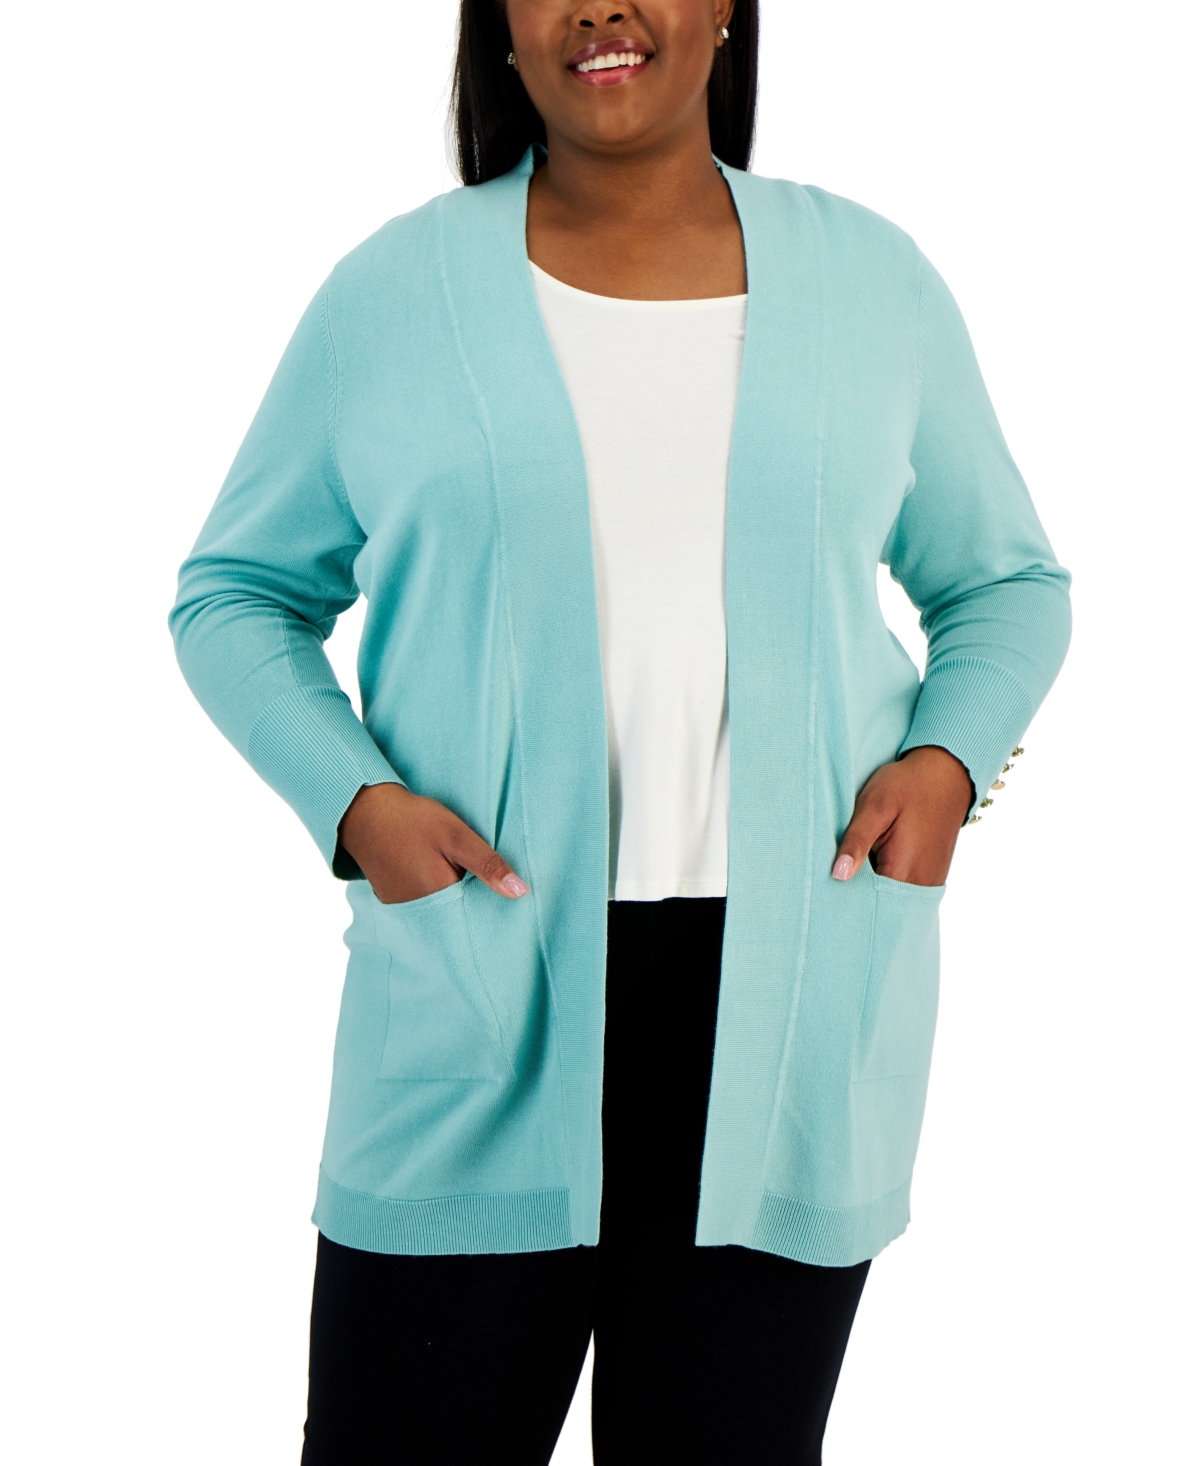 Jm Collection Women's Open-Front Pocket Long Cardigan, Created for Macy's